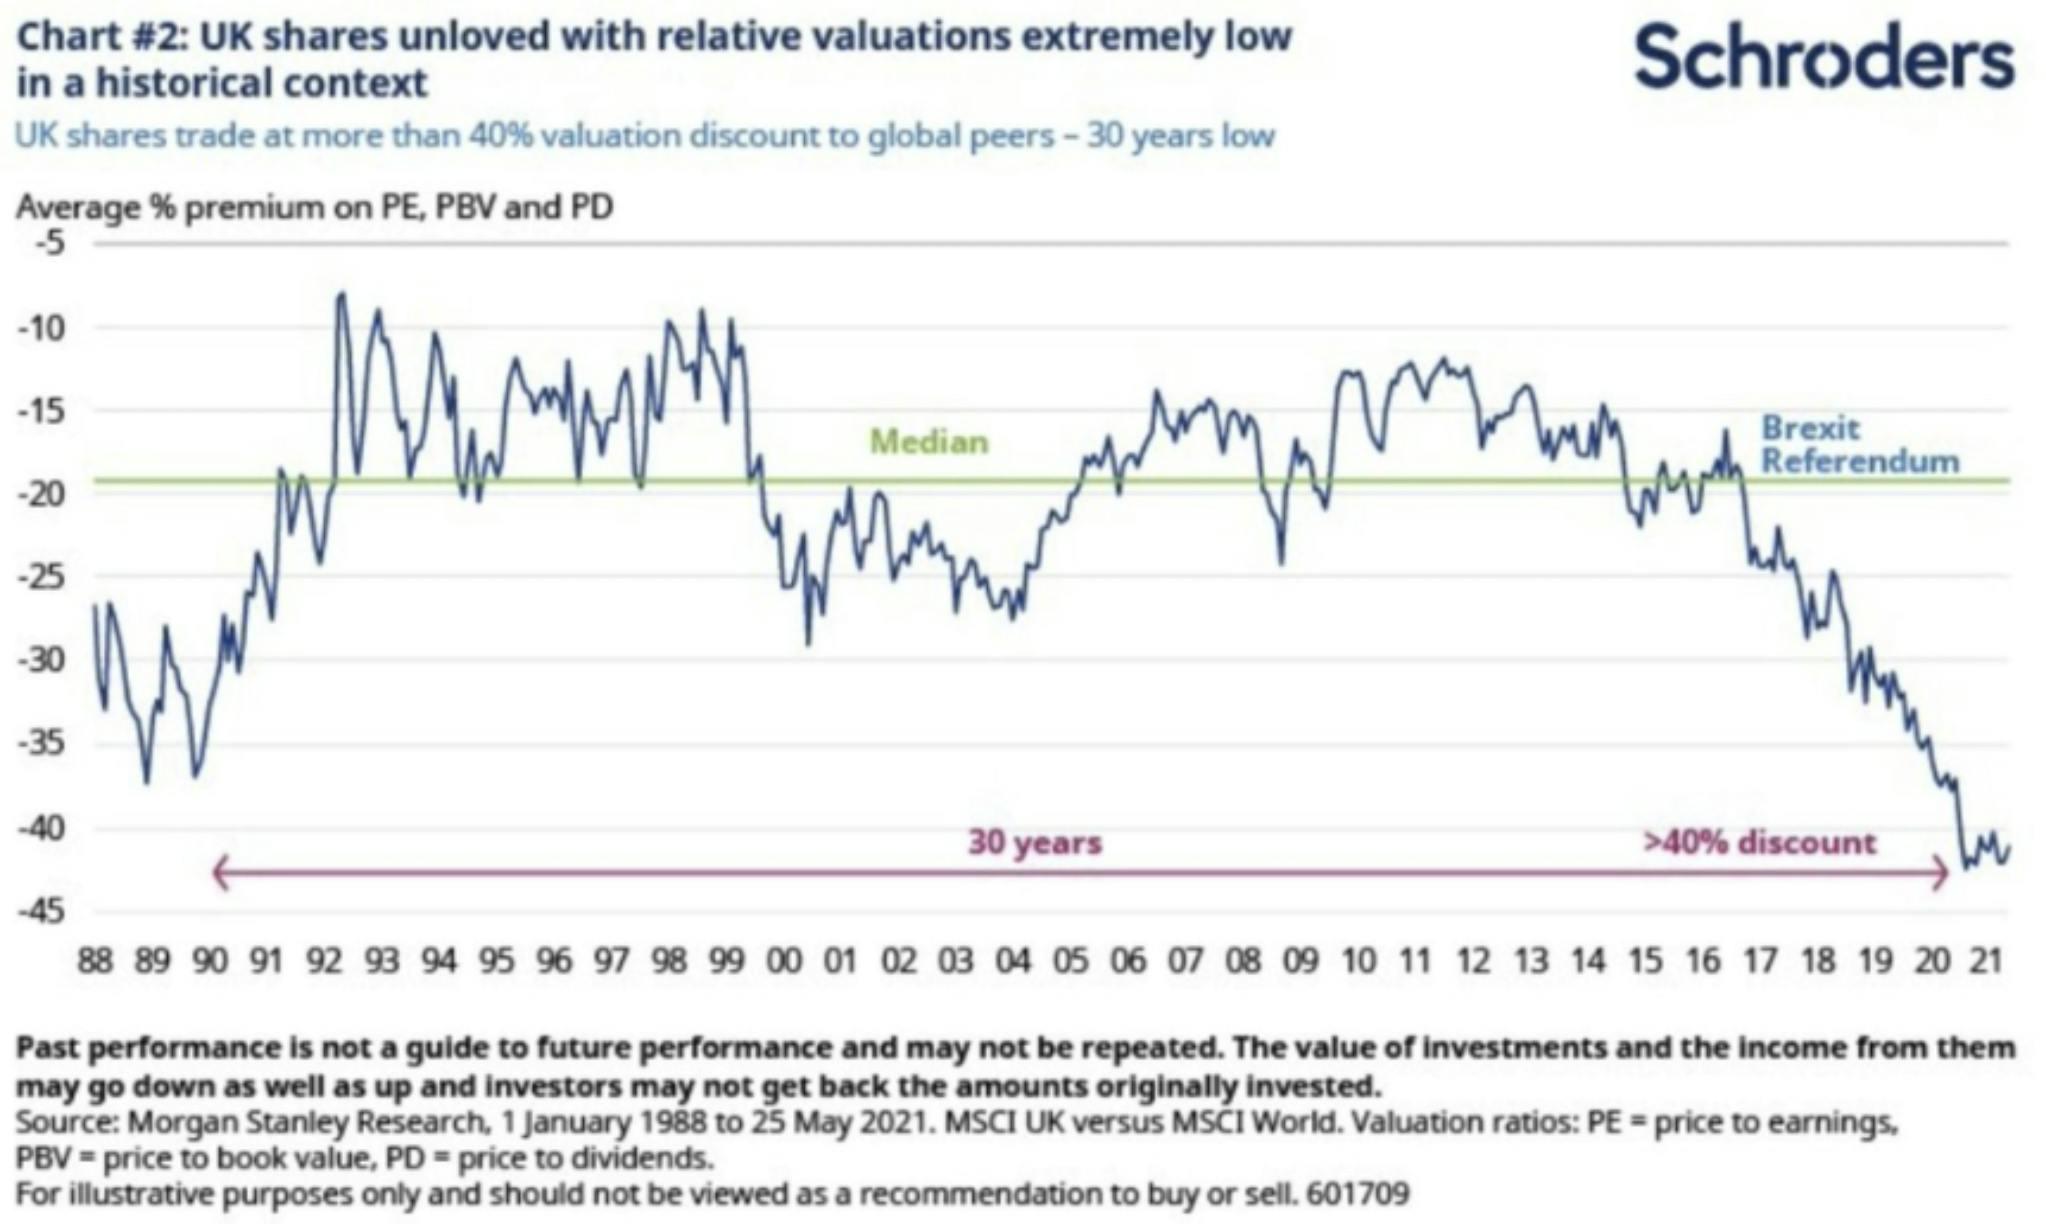 UK shares unloved with relative valuations extremely low in a historical context 